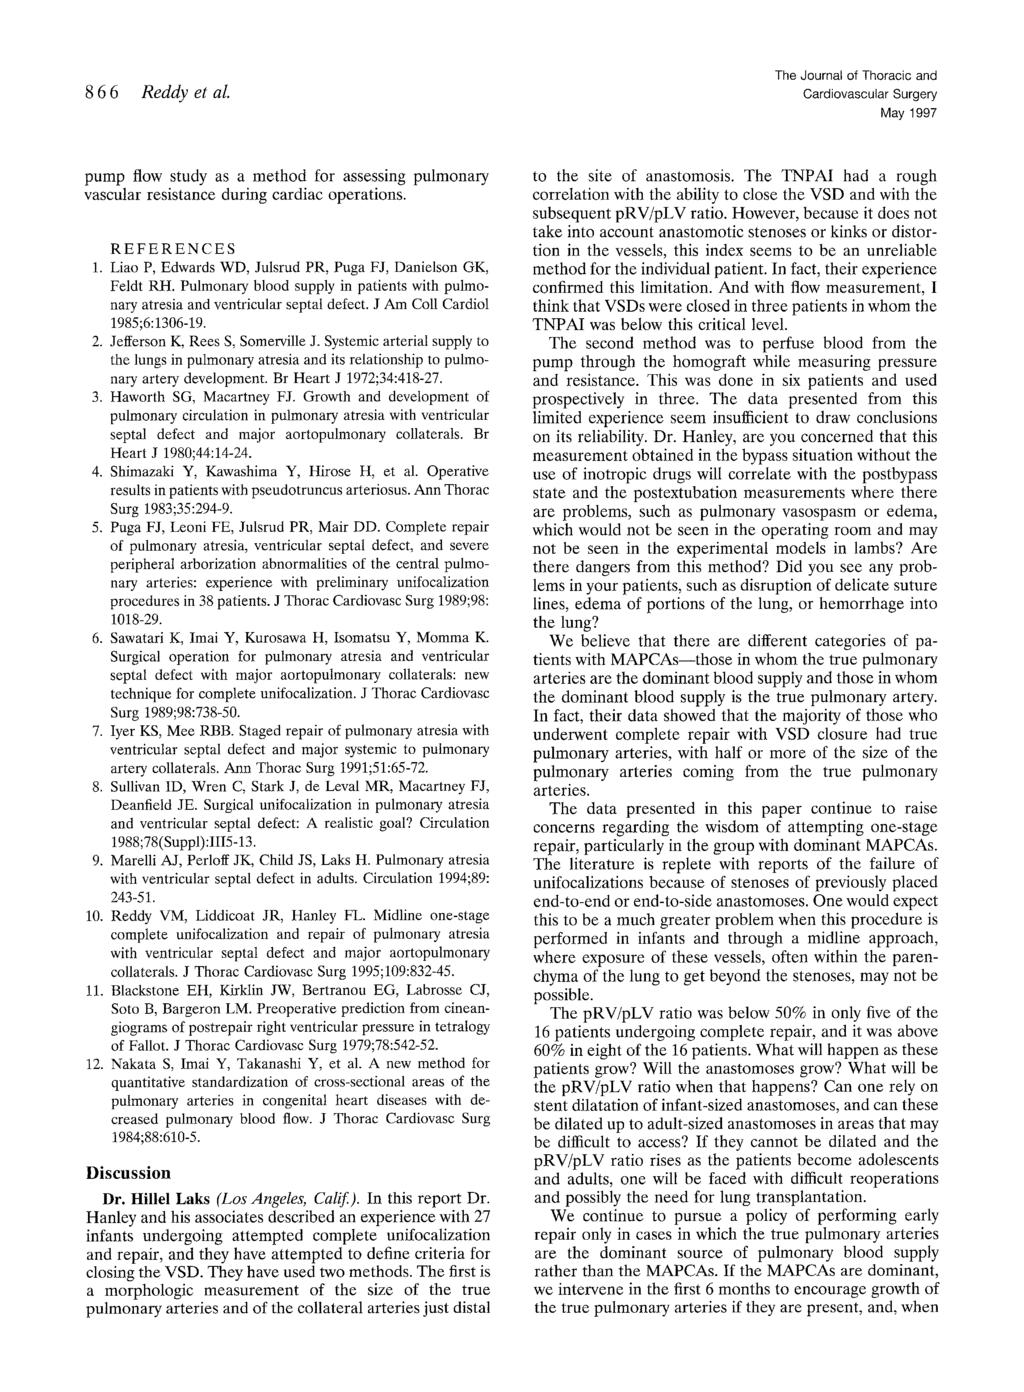 866 Reddy et al The Journal of Thoracic and May 1997 pump flow study as a method for assessing pulmonary vascular resistance during cardiac operations. REFERENCES 1.